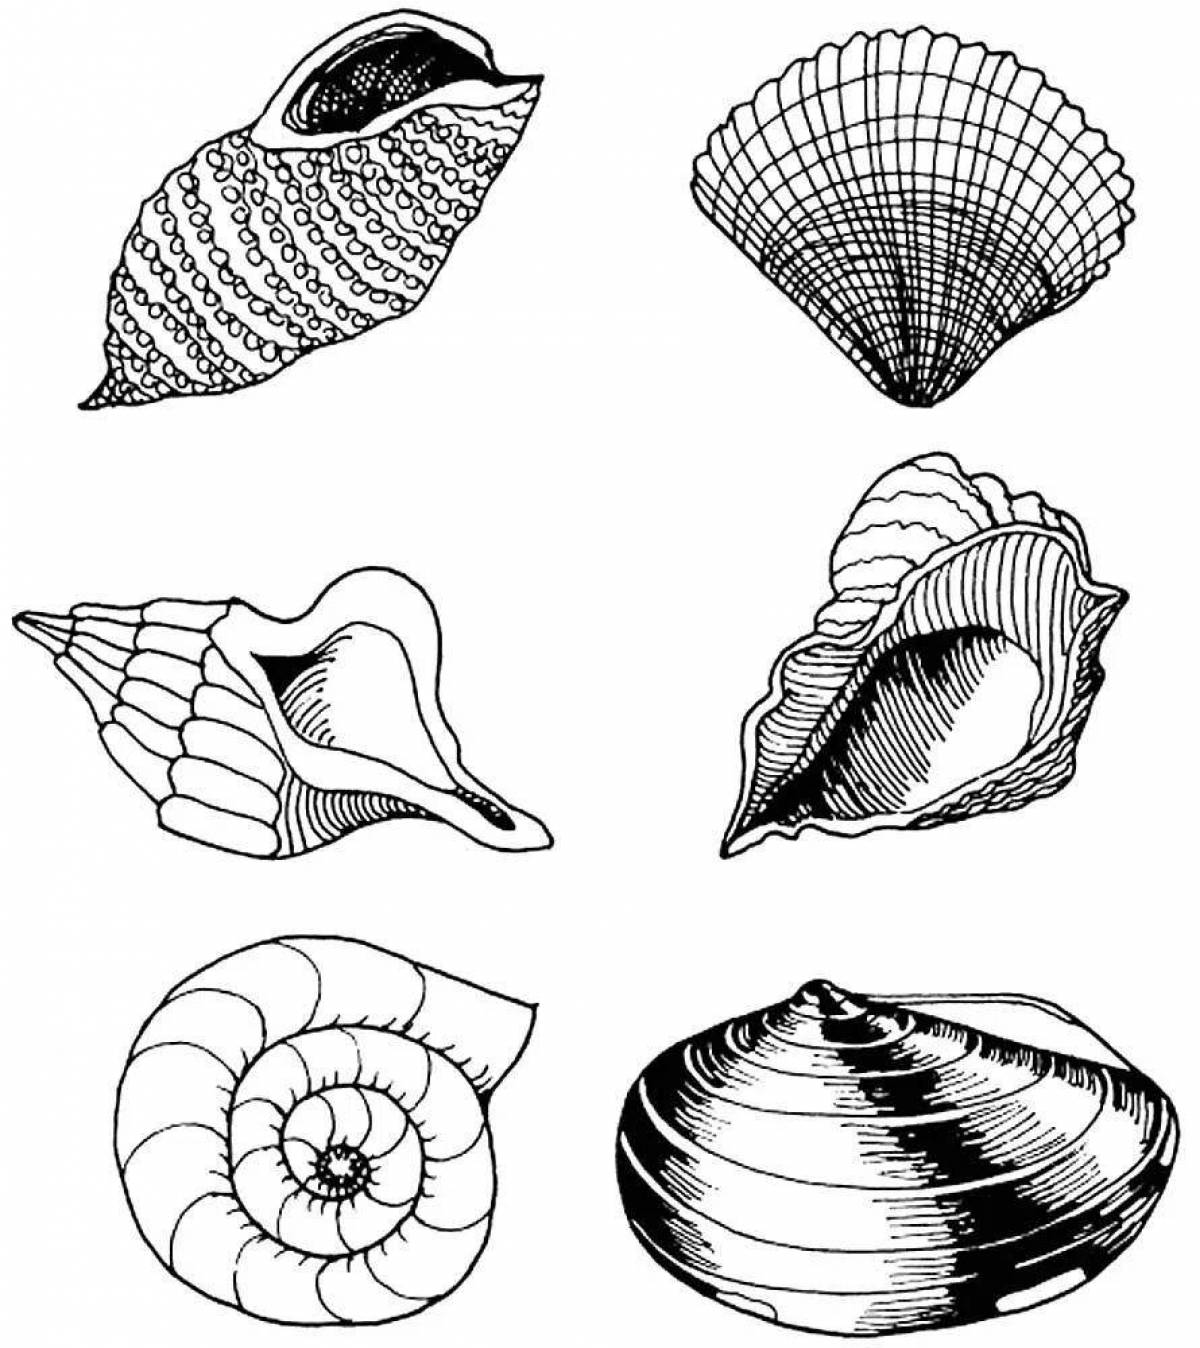 Glittering shell coloring book for kids